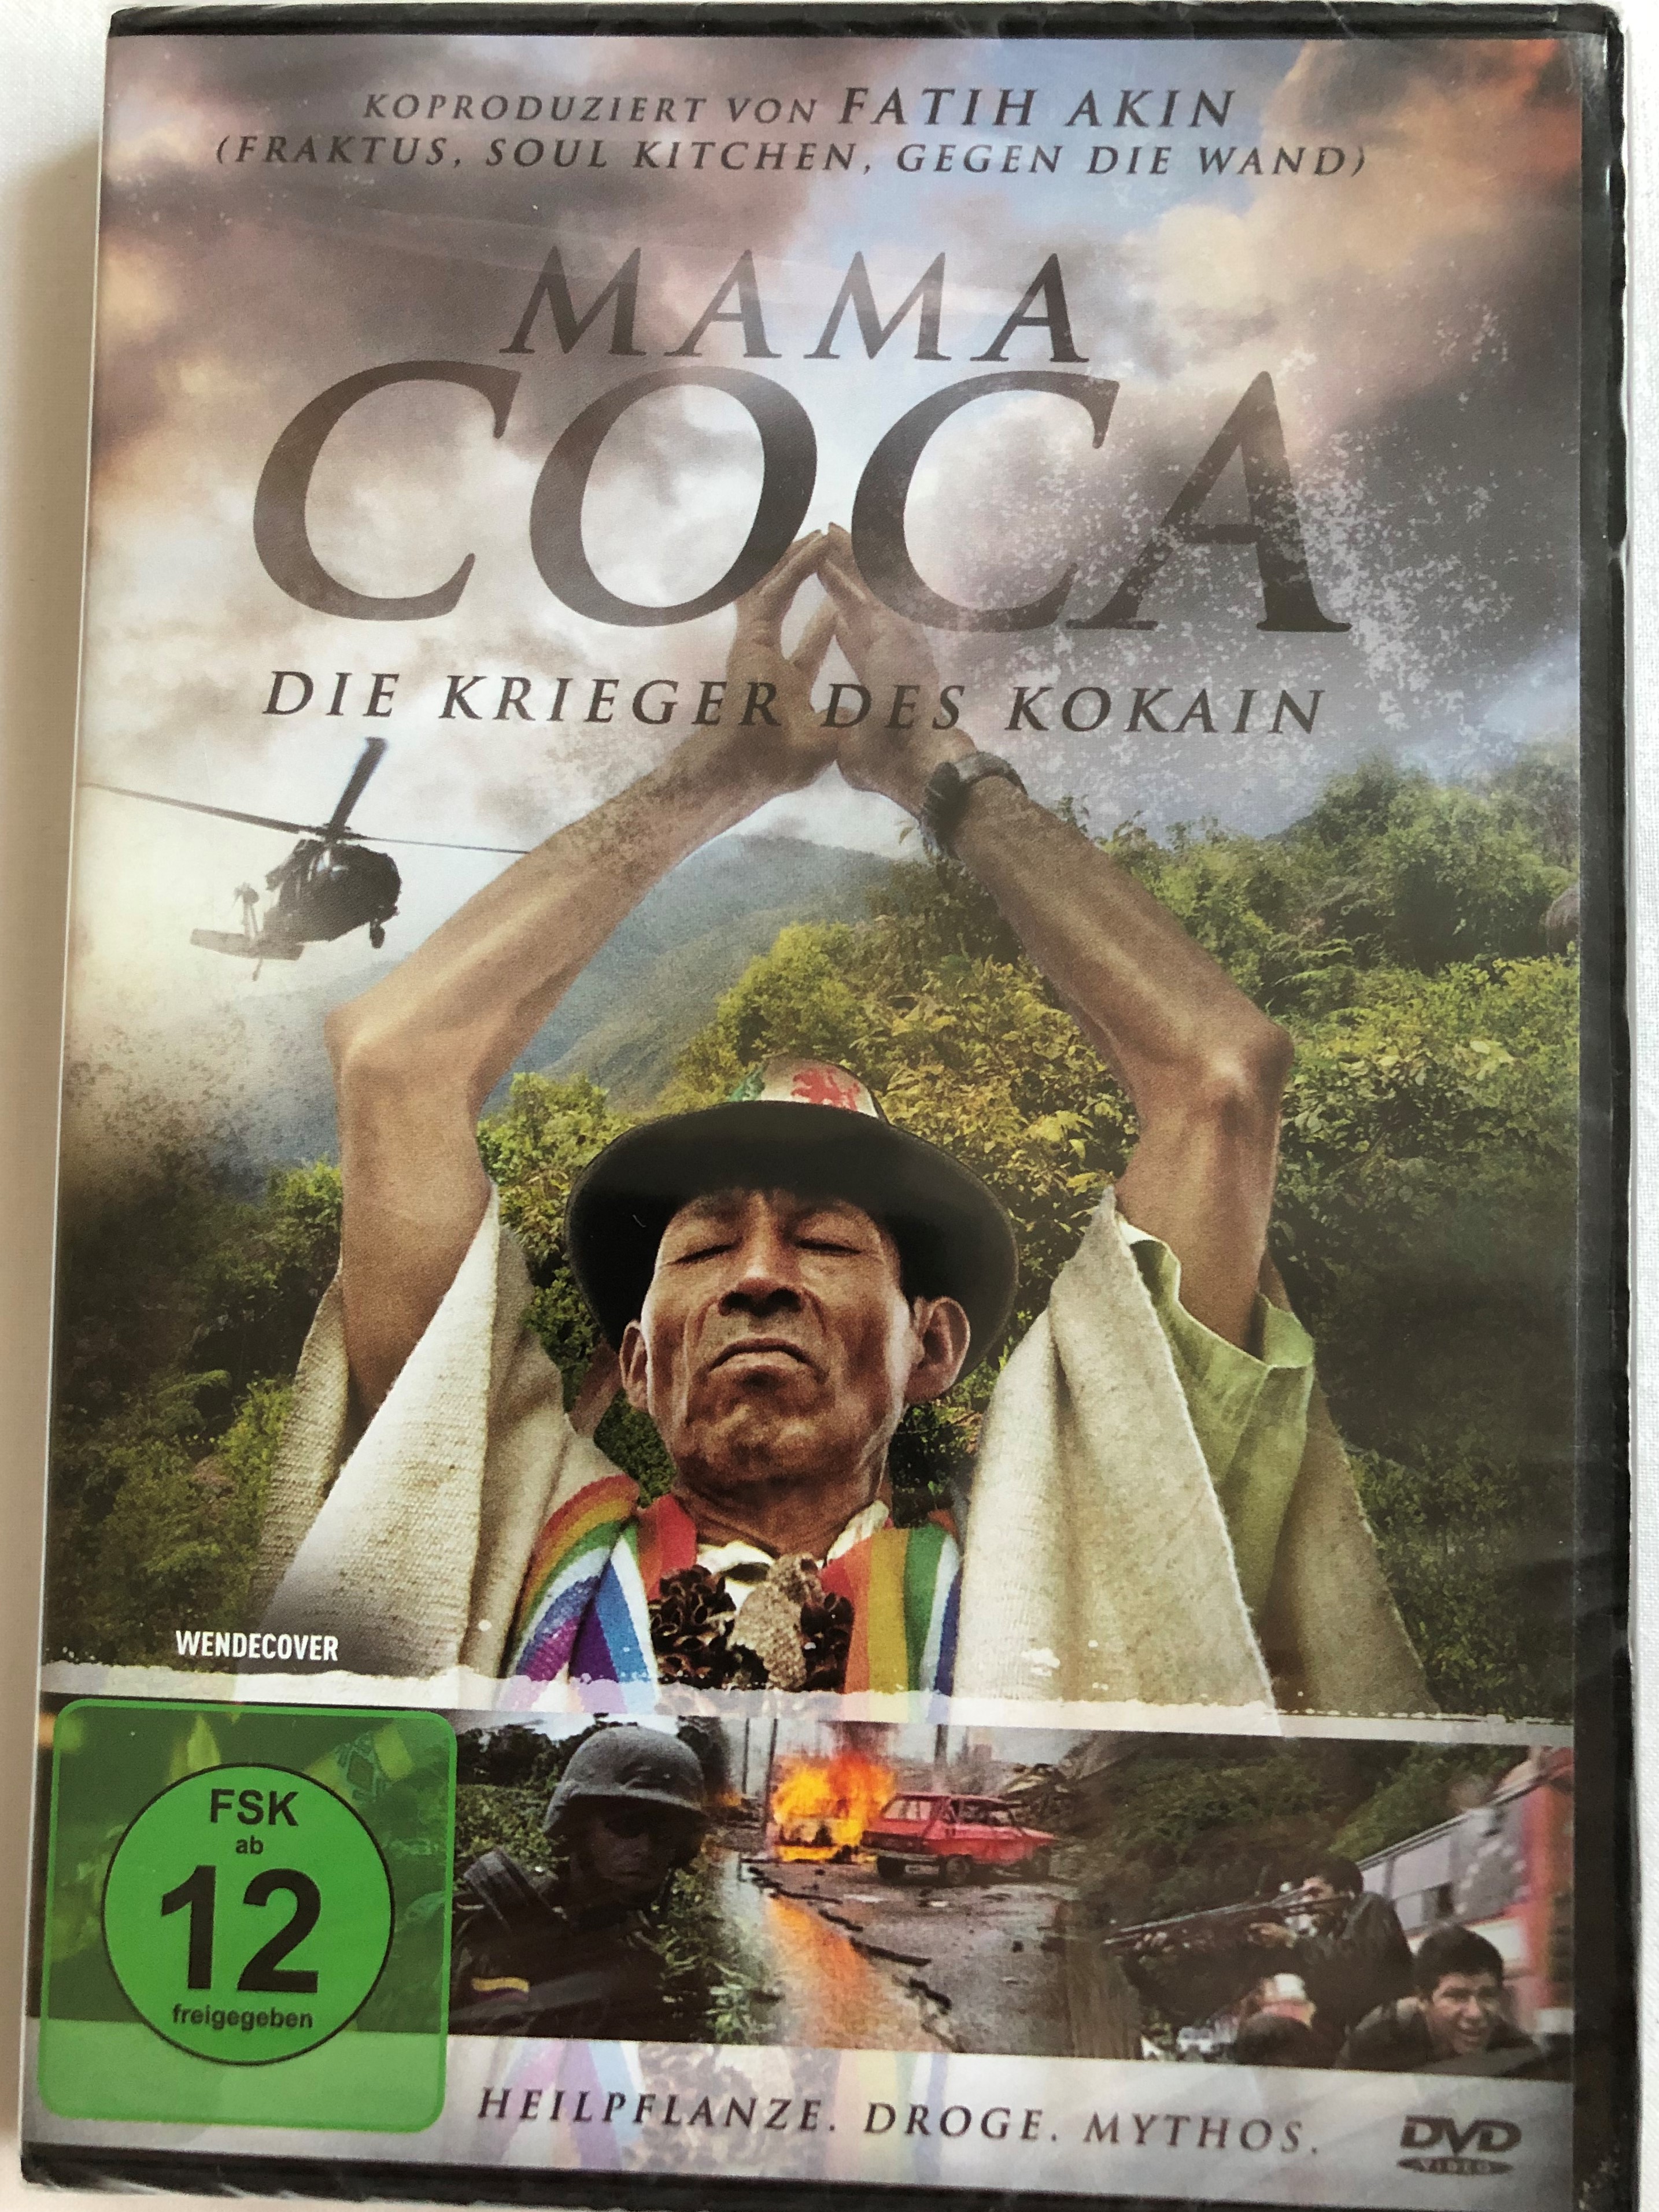 mama-coca-die-krieger-des-kokain-dvd-2014-mama-coca-warriors-of-cocaine-directed-by-suzan-sekerci-a-faith-akin-co-production-german-documentary-about-drug-wars-1-.jpg